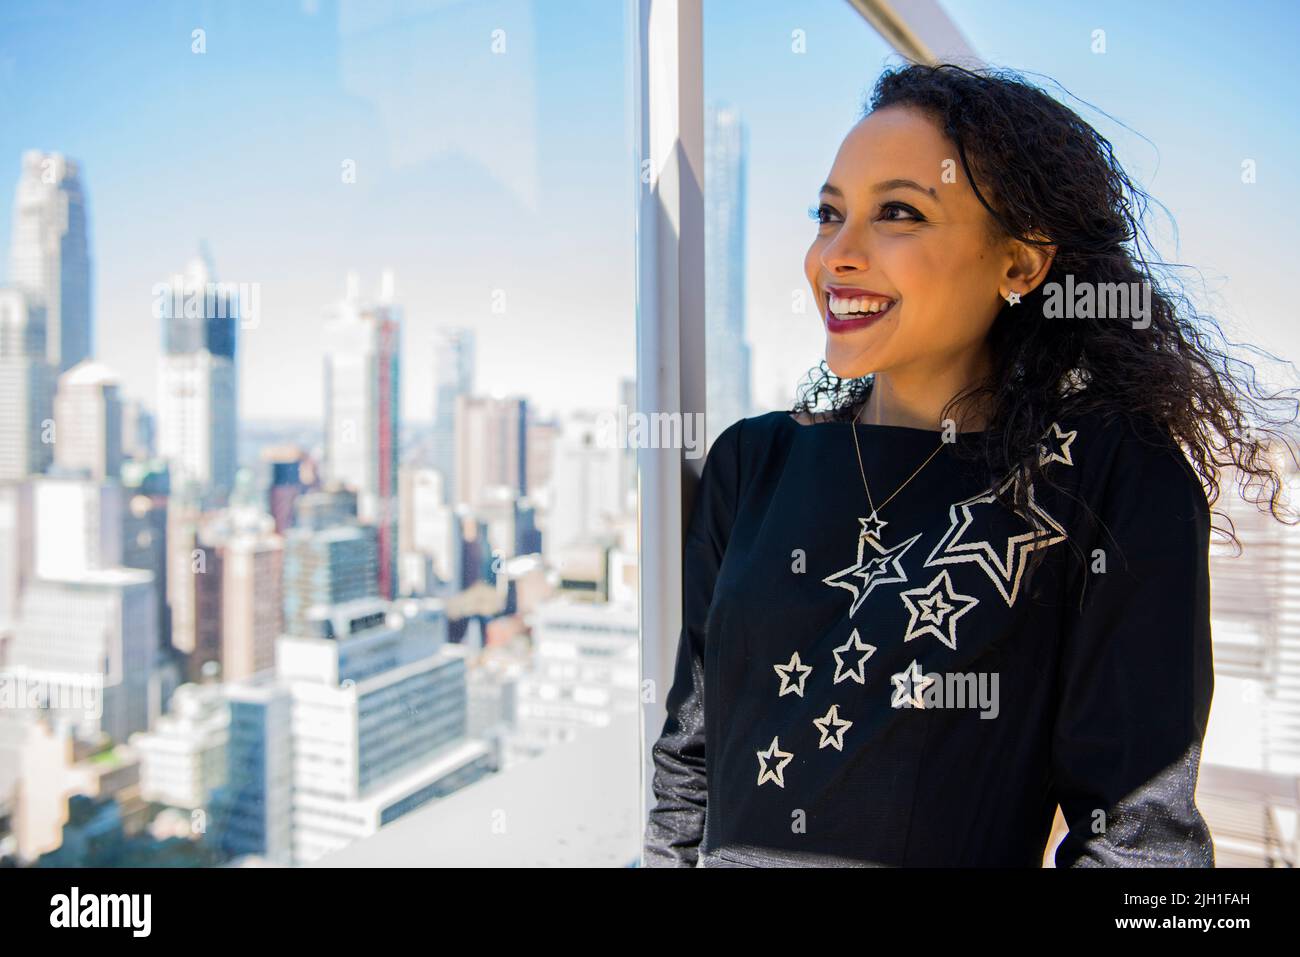 New York, USA. Attractive, Hispanic woman overlooking Down Town Manhattan Real Estate and Skyscrapers from the 58th floor of her apartment building. RealEstate is Booming in the Big Apple and usually very Expensive with Huge Competition on the Housing Market. Stock Photo